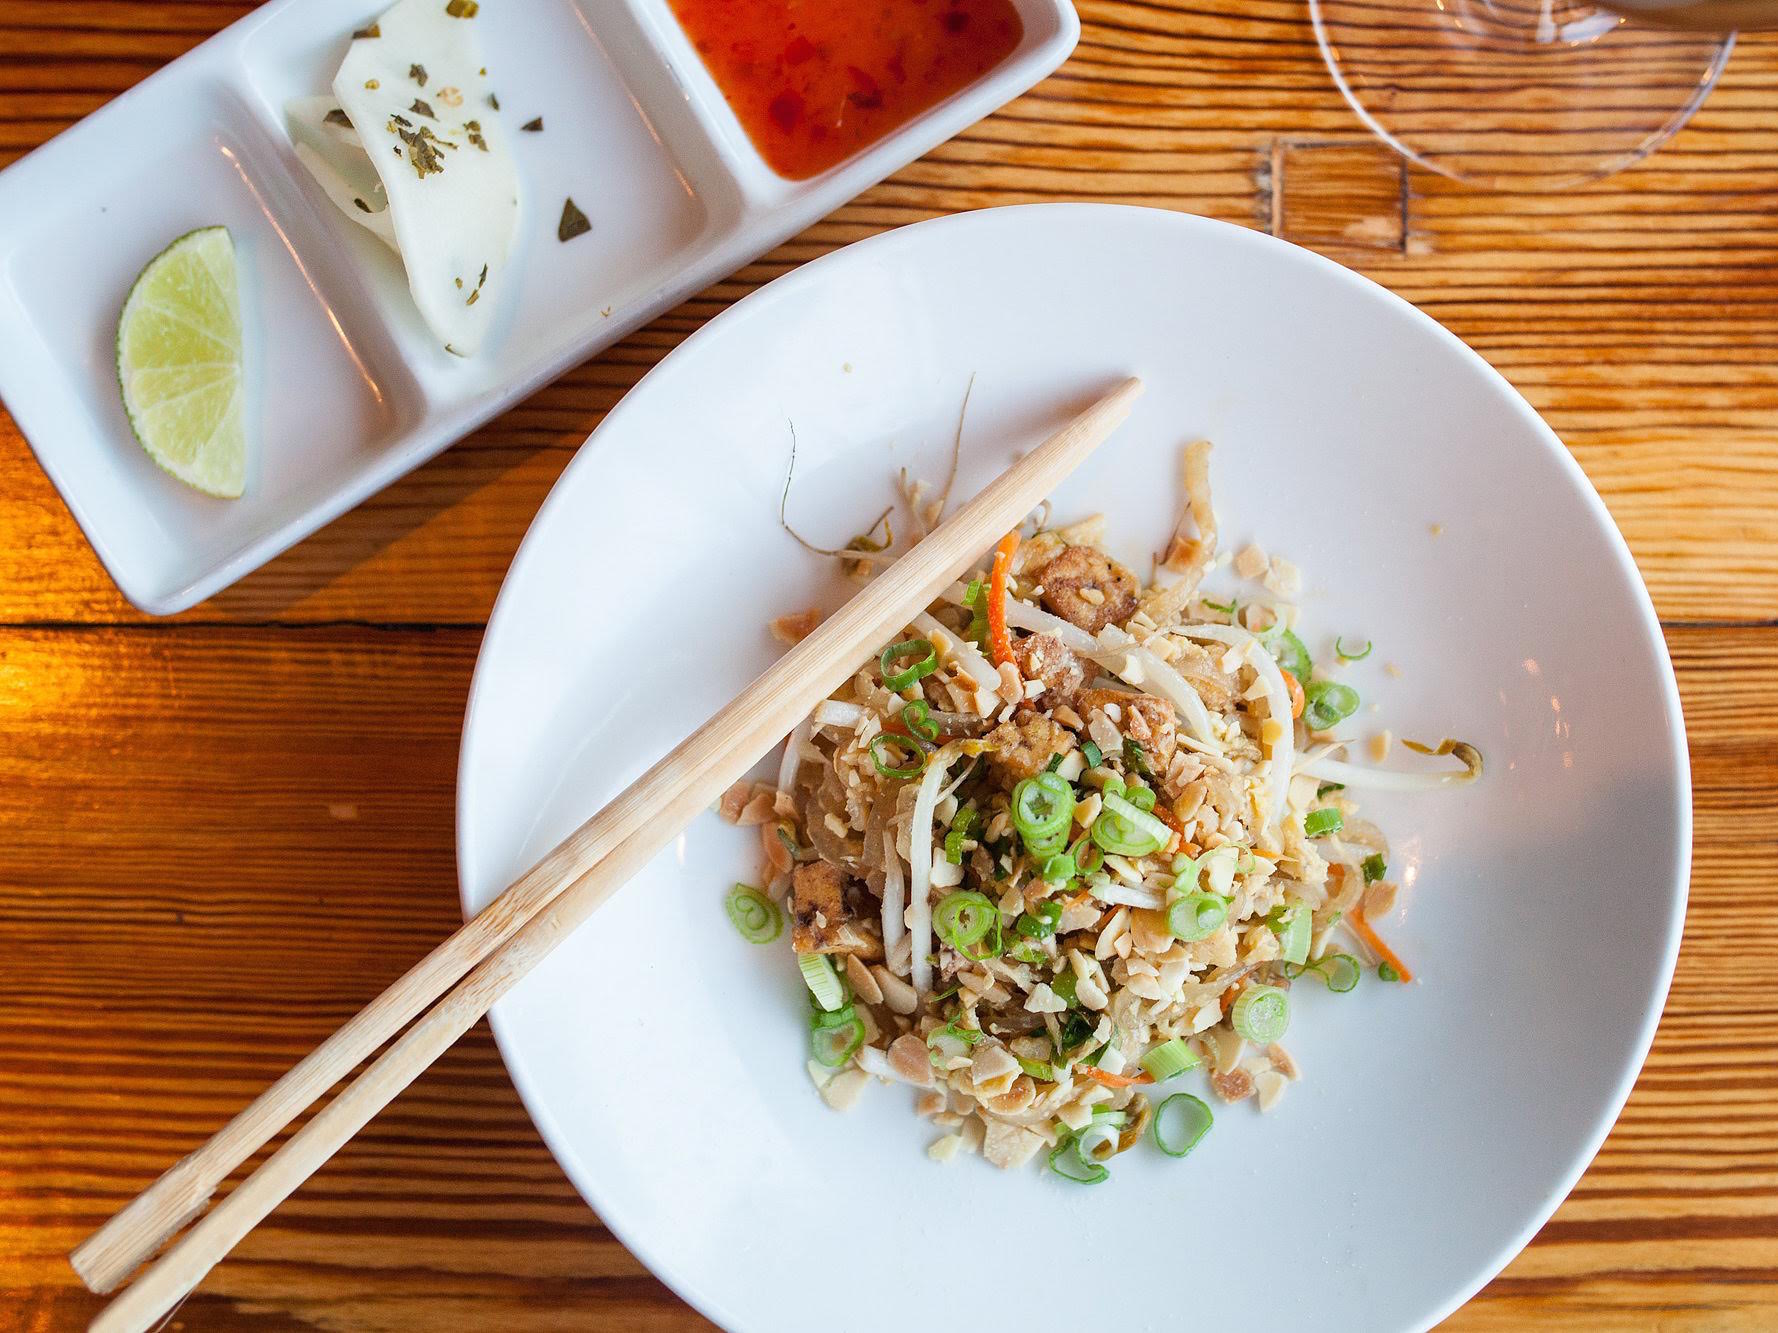 Picture pad Thai and a ganglion of stir-fried noodles coated in a sweet and savory peanut sauce typically comes to mind. But a few restaurants are upending the dish by removing noodles — at least in their typical form — and introducing heavy doses of creativity instead